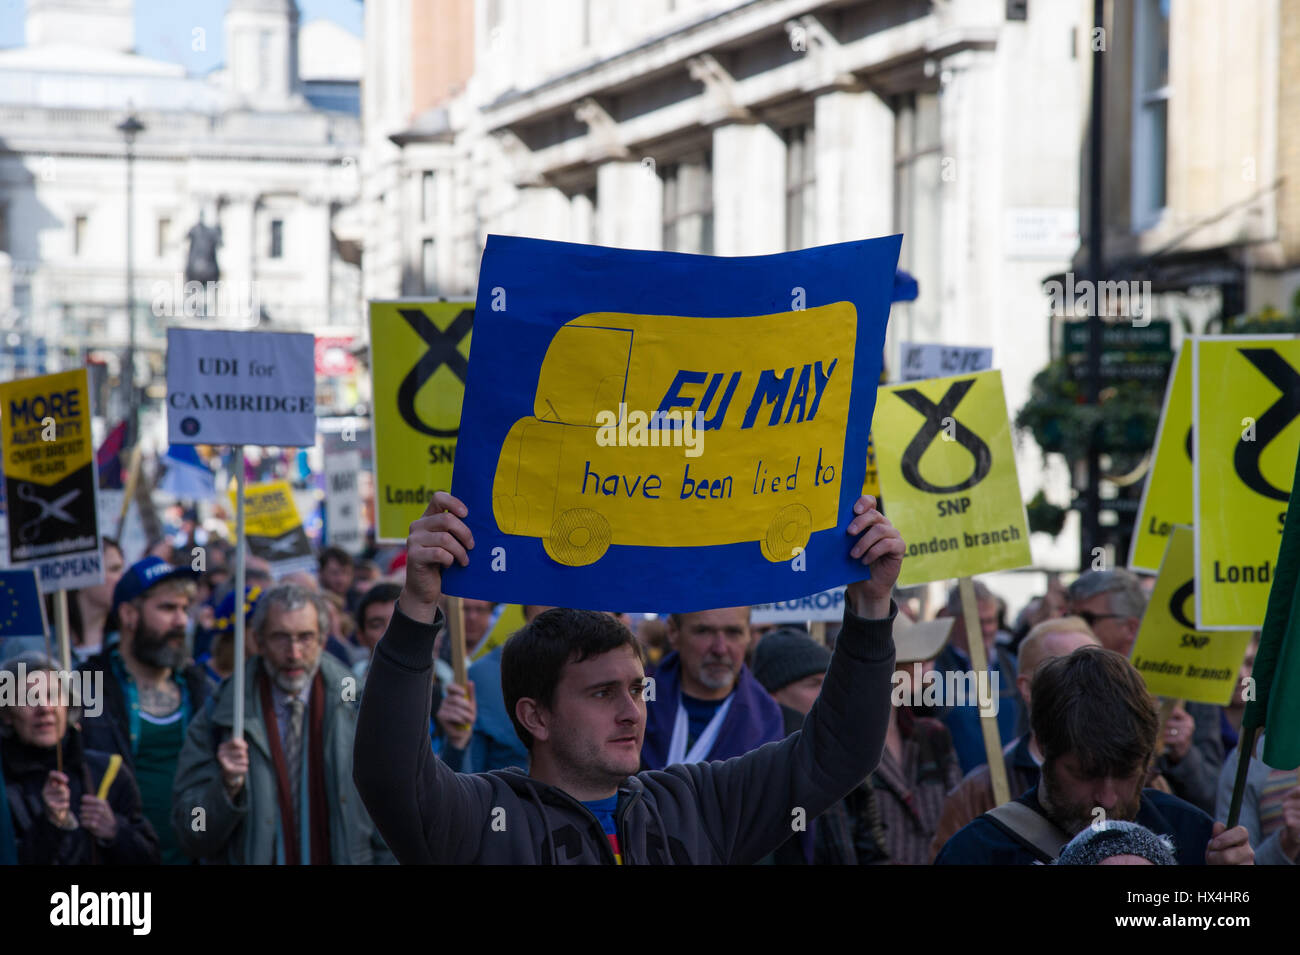 London, England, UK.  25th March 2017.Supporters of the EU marched through London and gathered at Westminster to protest against Brexit. Andrew Steven Graham/Alamy Live News Stock Photo